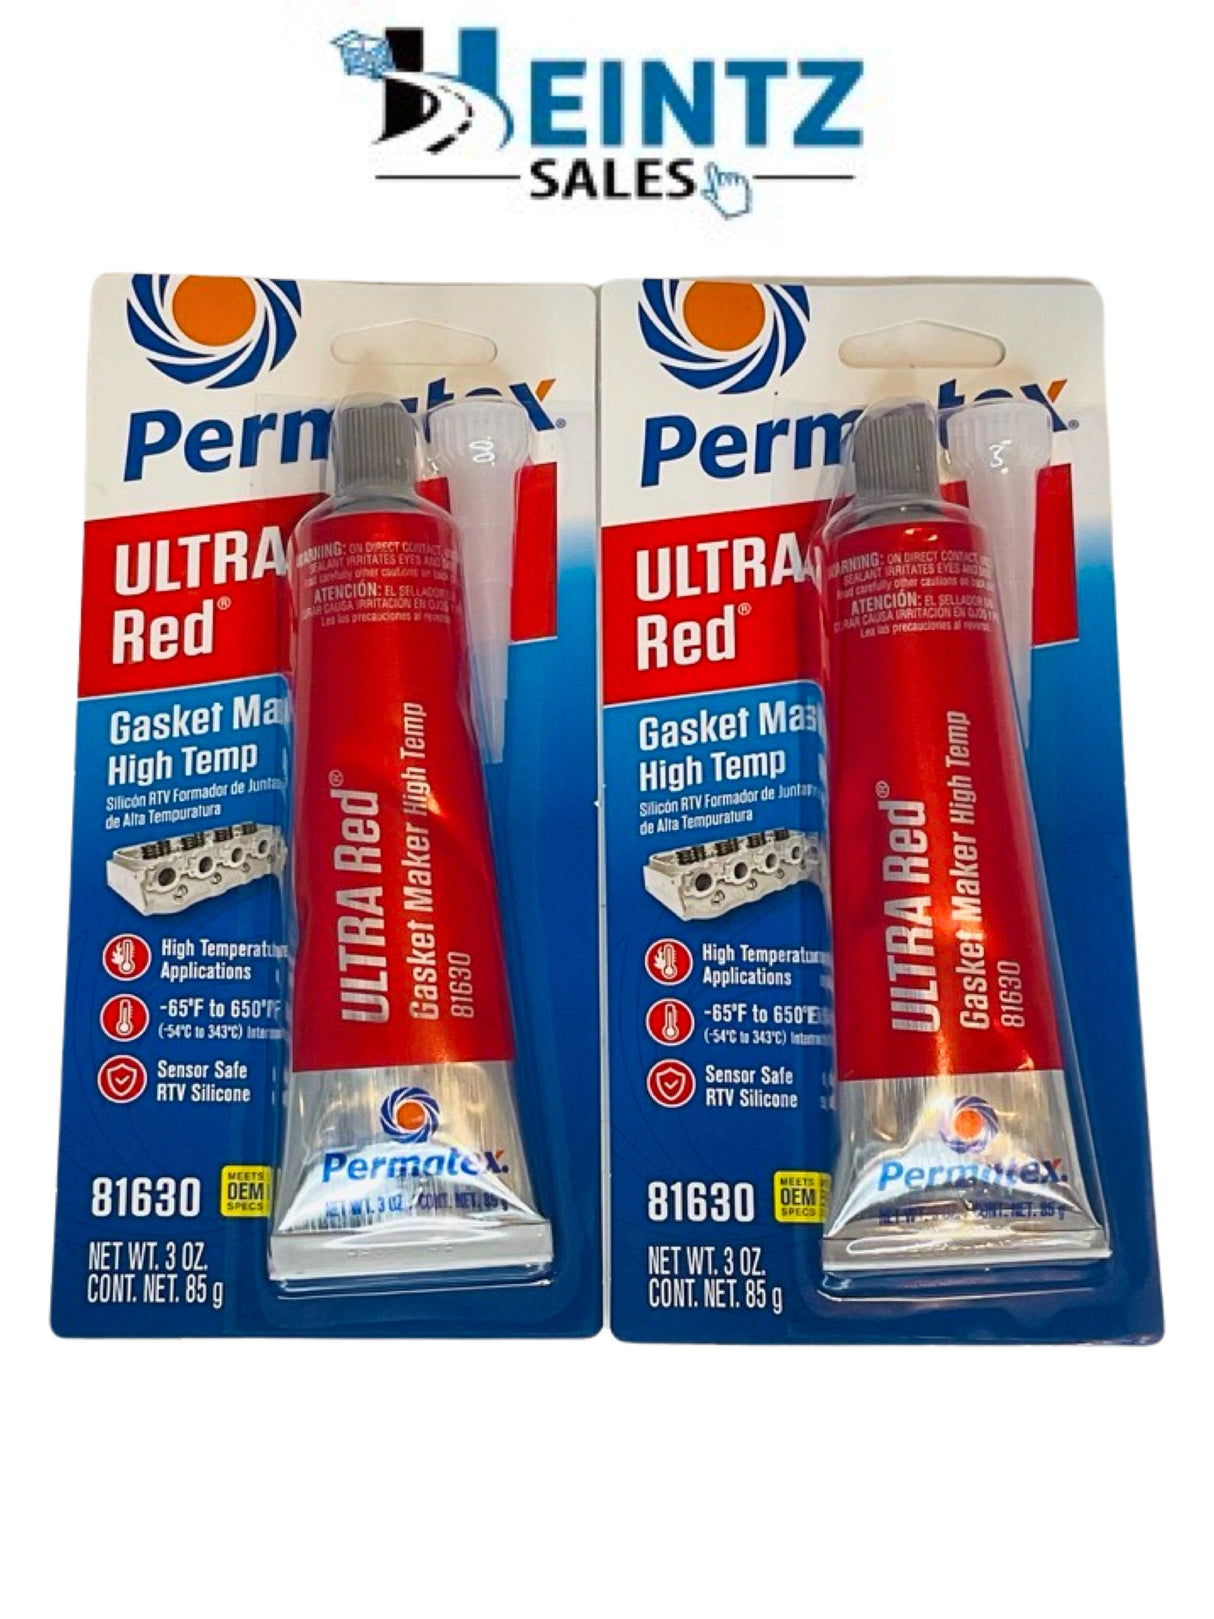 Permatex 81630 High-Temp Red RTV Silicone Gasket Maker 3oz/85g-GET ONE FREE!!!